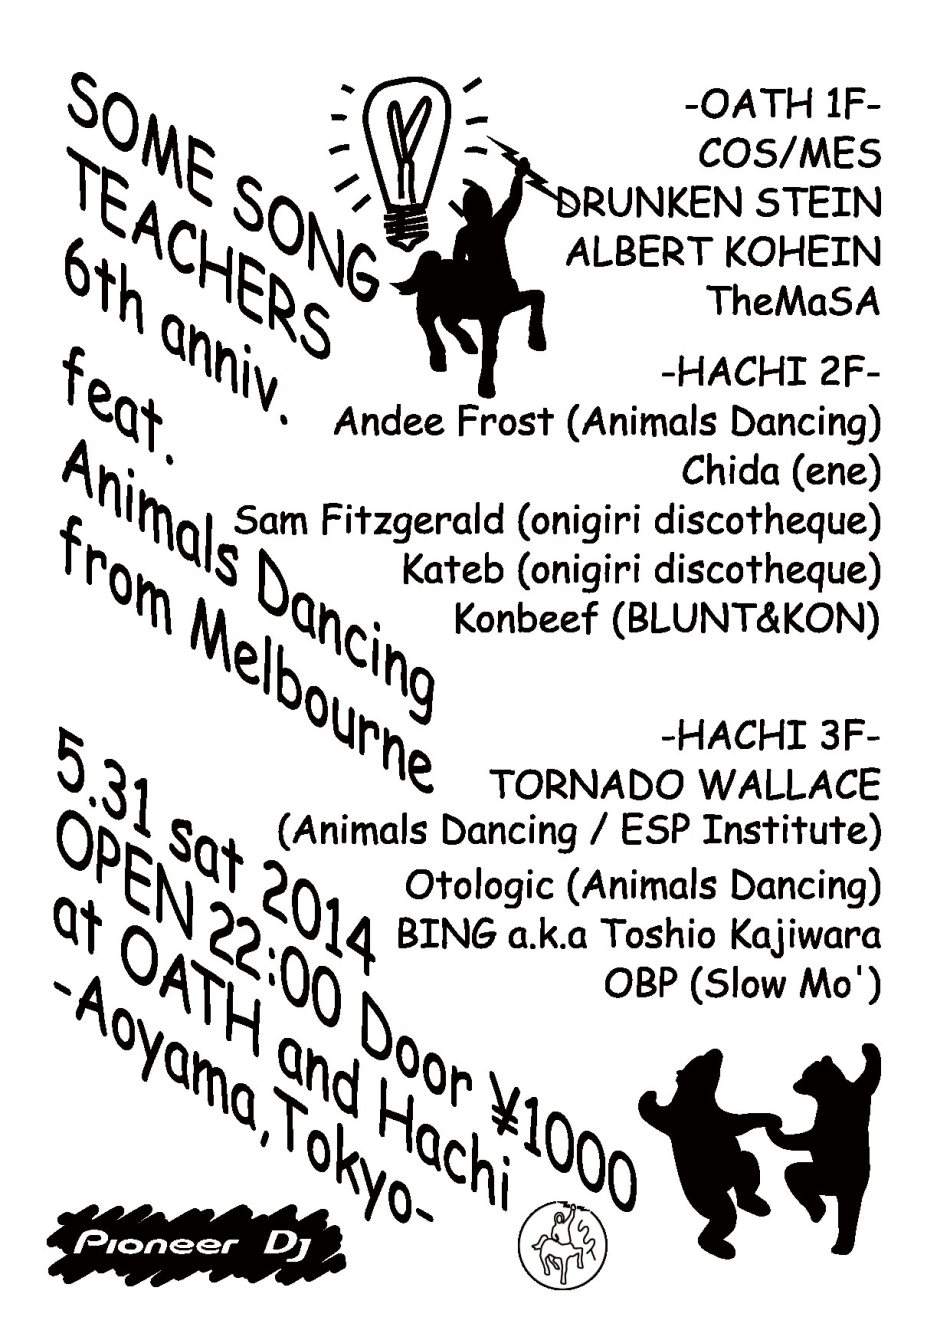 Some Song Teachers 6th Anniversary Feat. Animals Dancing - フライヤー裏